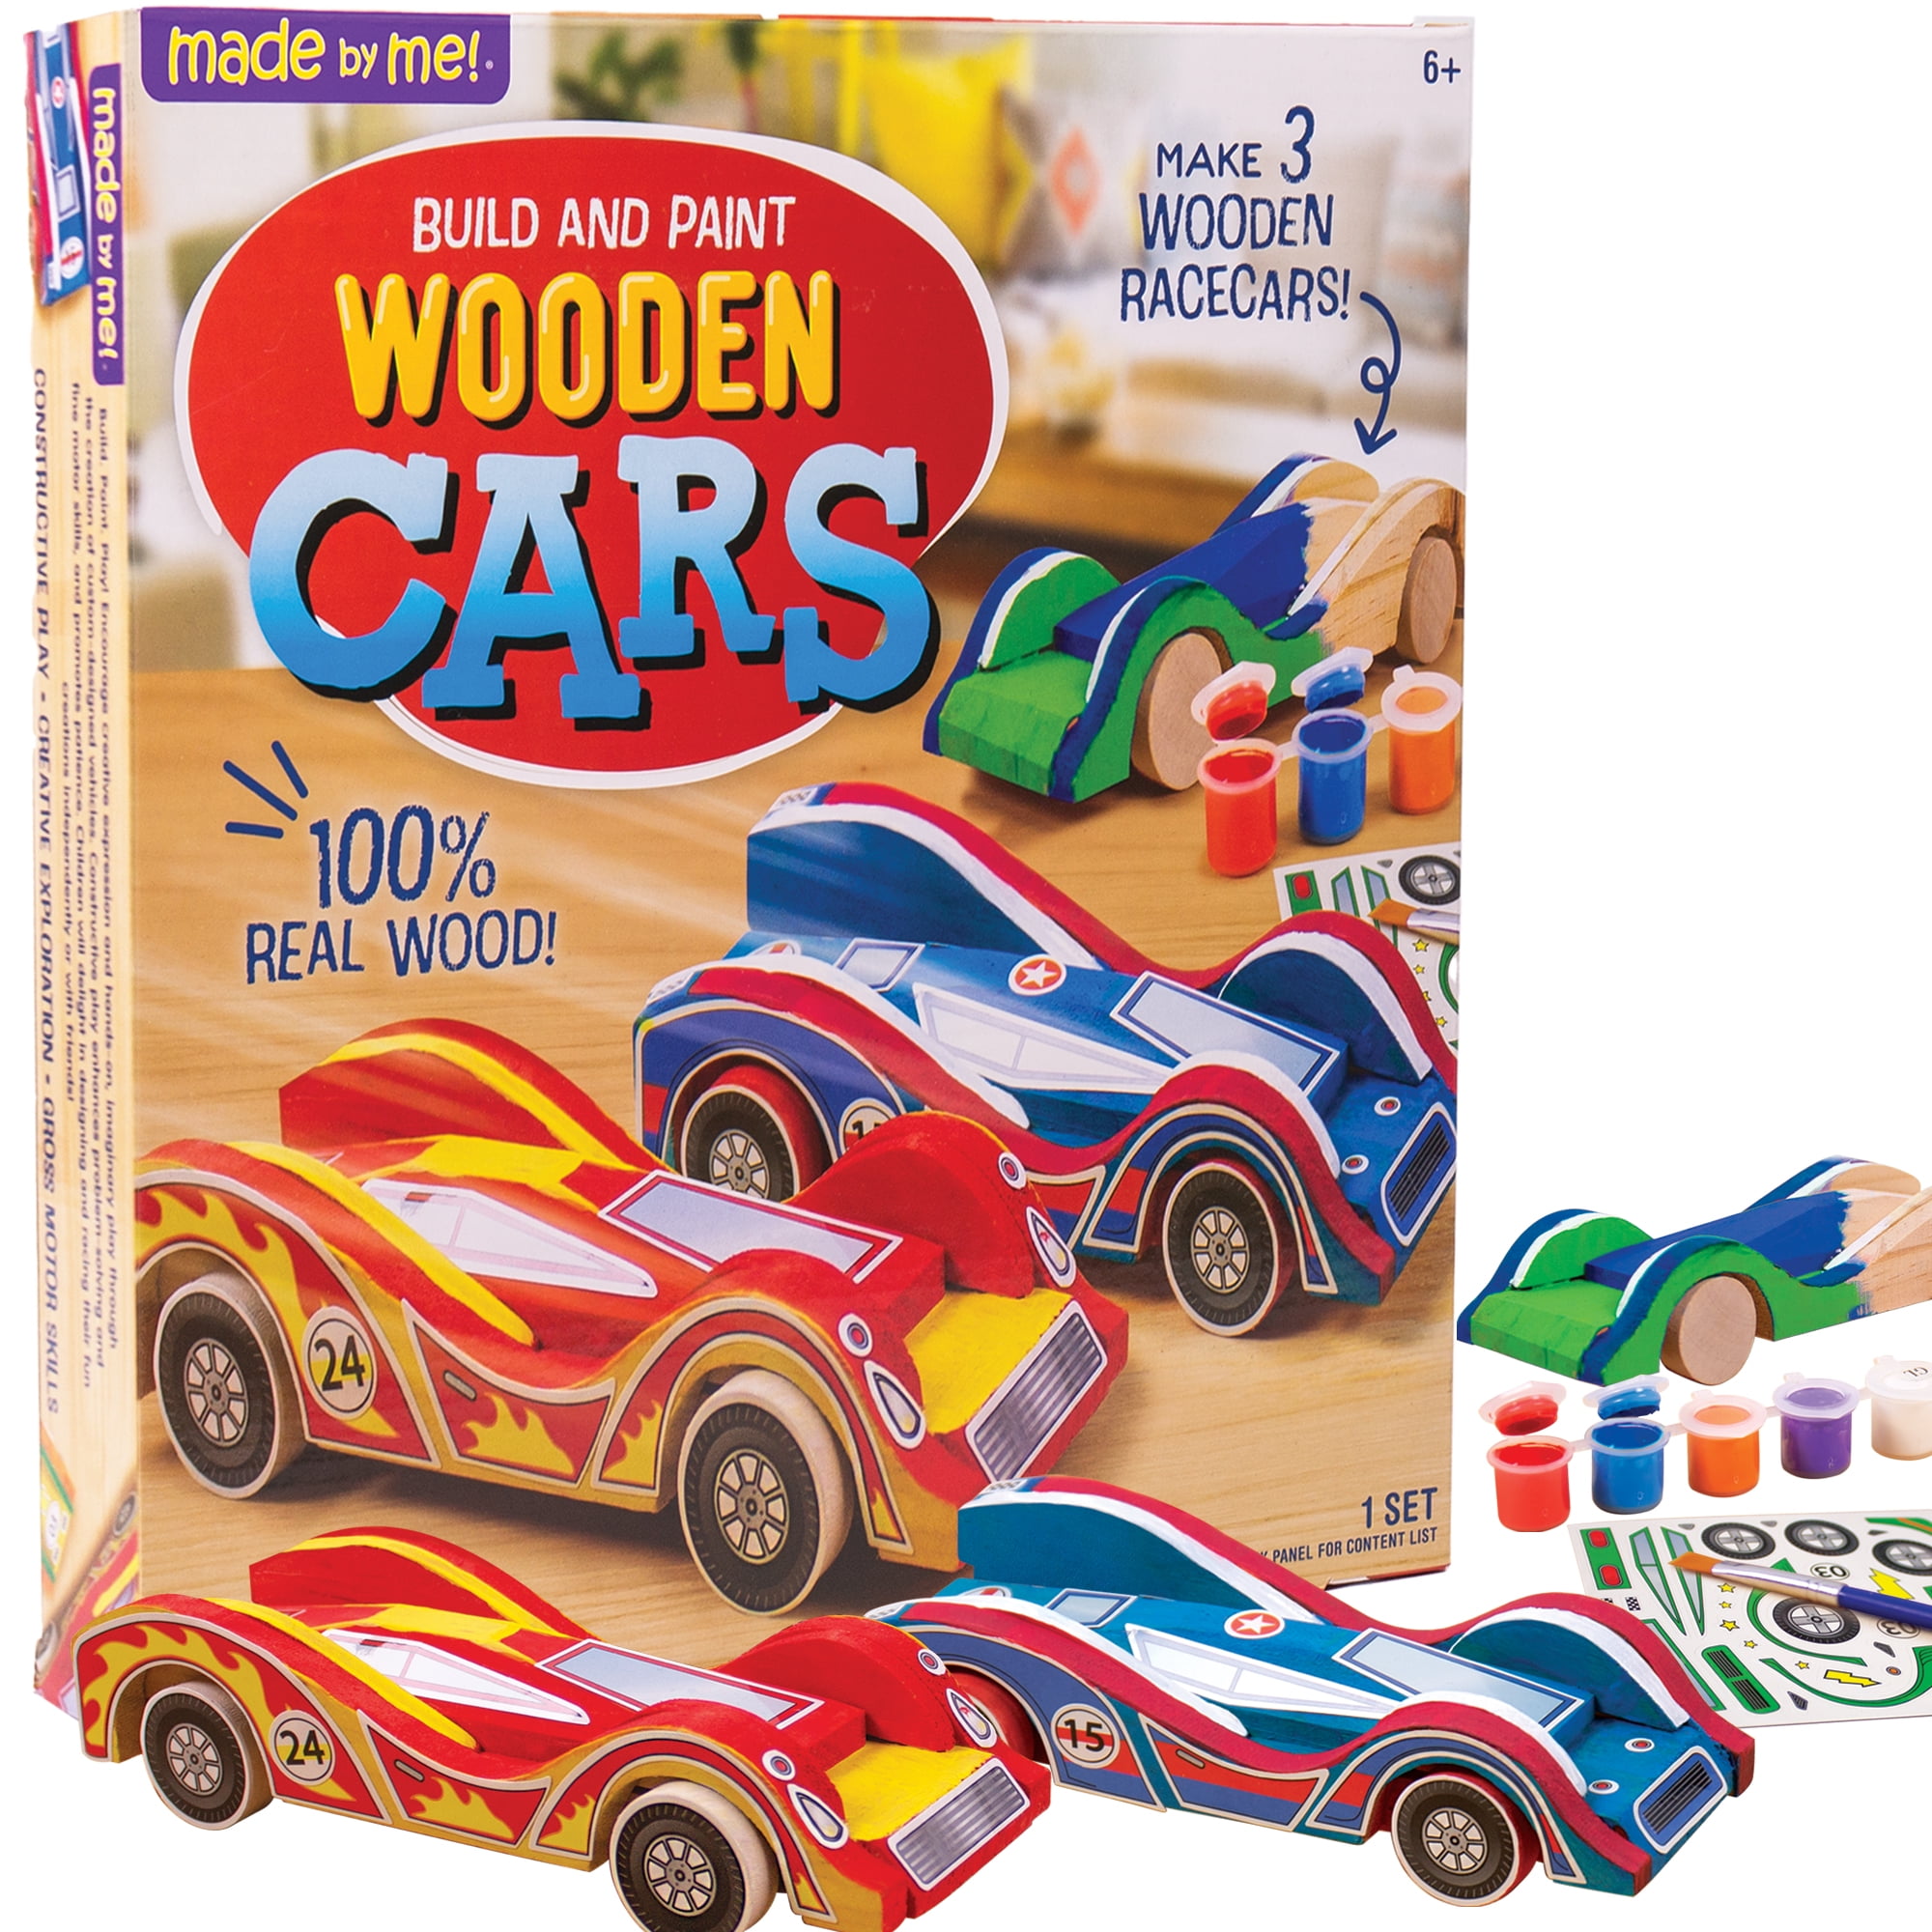 Build and customize your own toy car! Fun for the entire family!